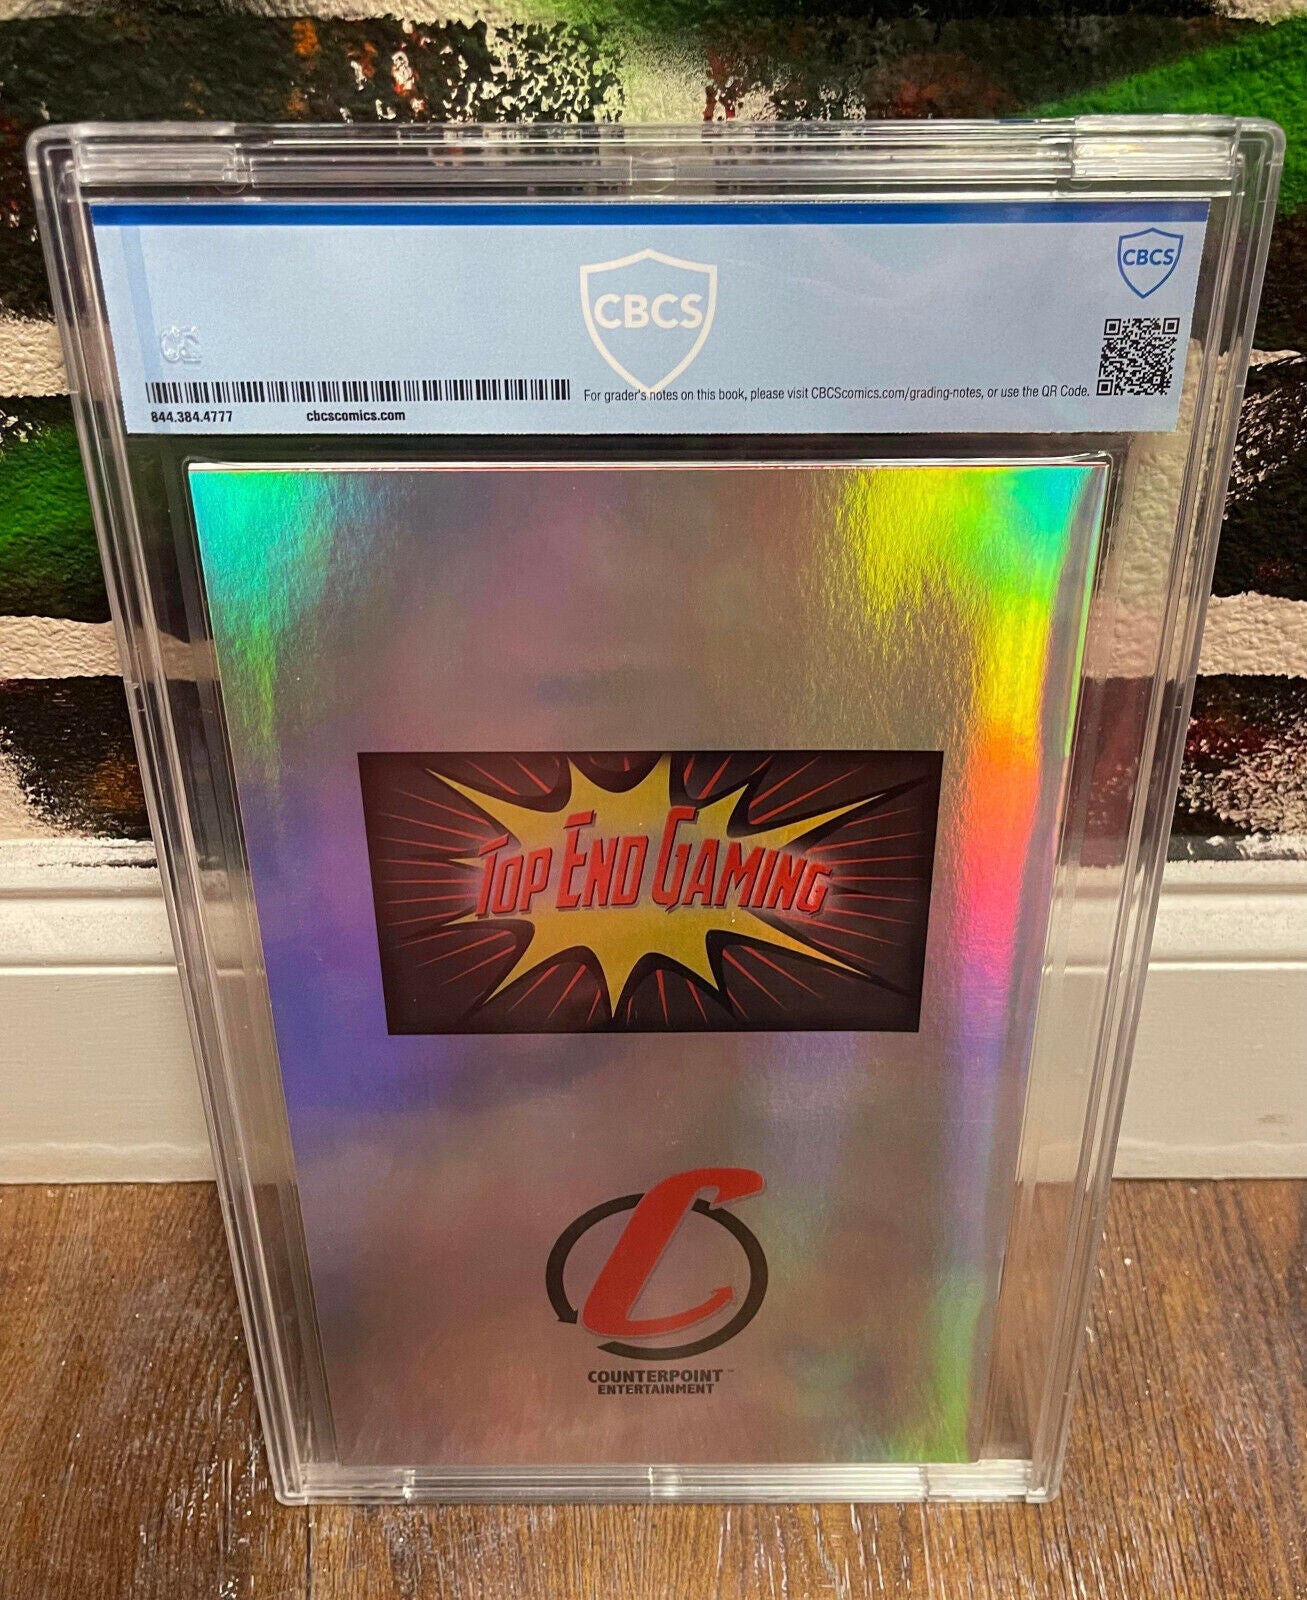 Do You Pooh? #nn Counterpoint 2019 Foil Cover Gaming Exclusive CBCS 9.8